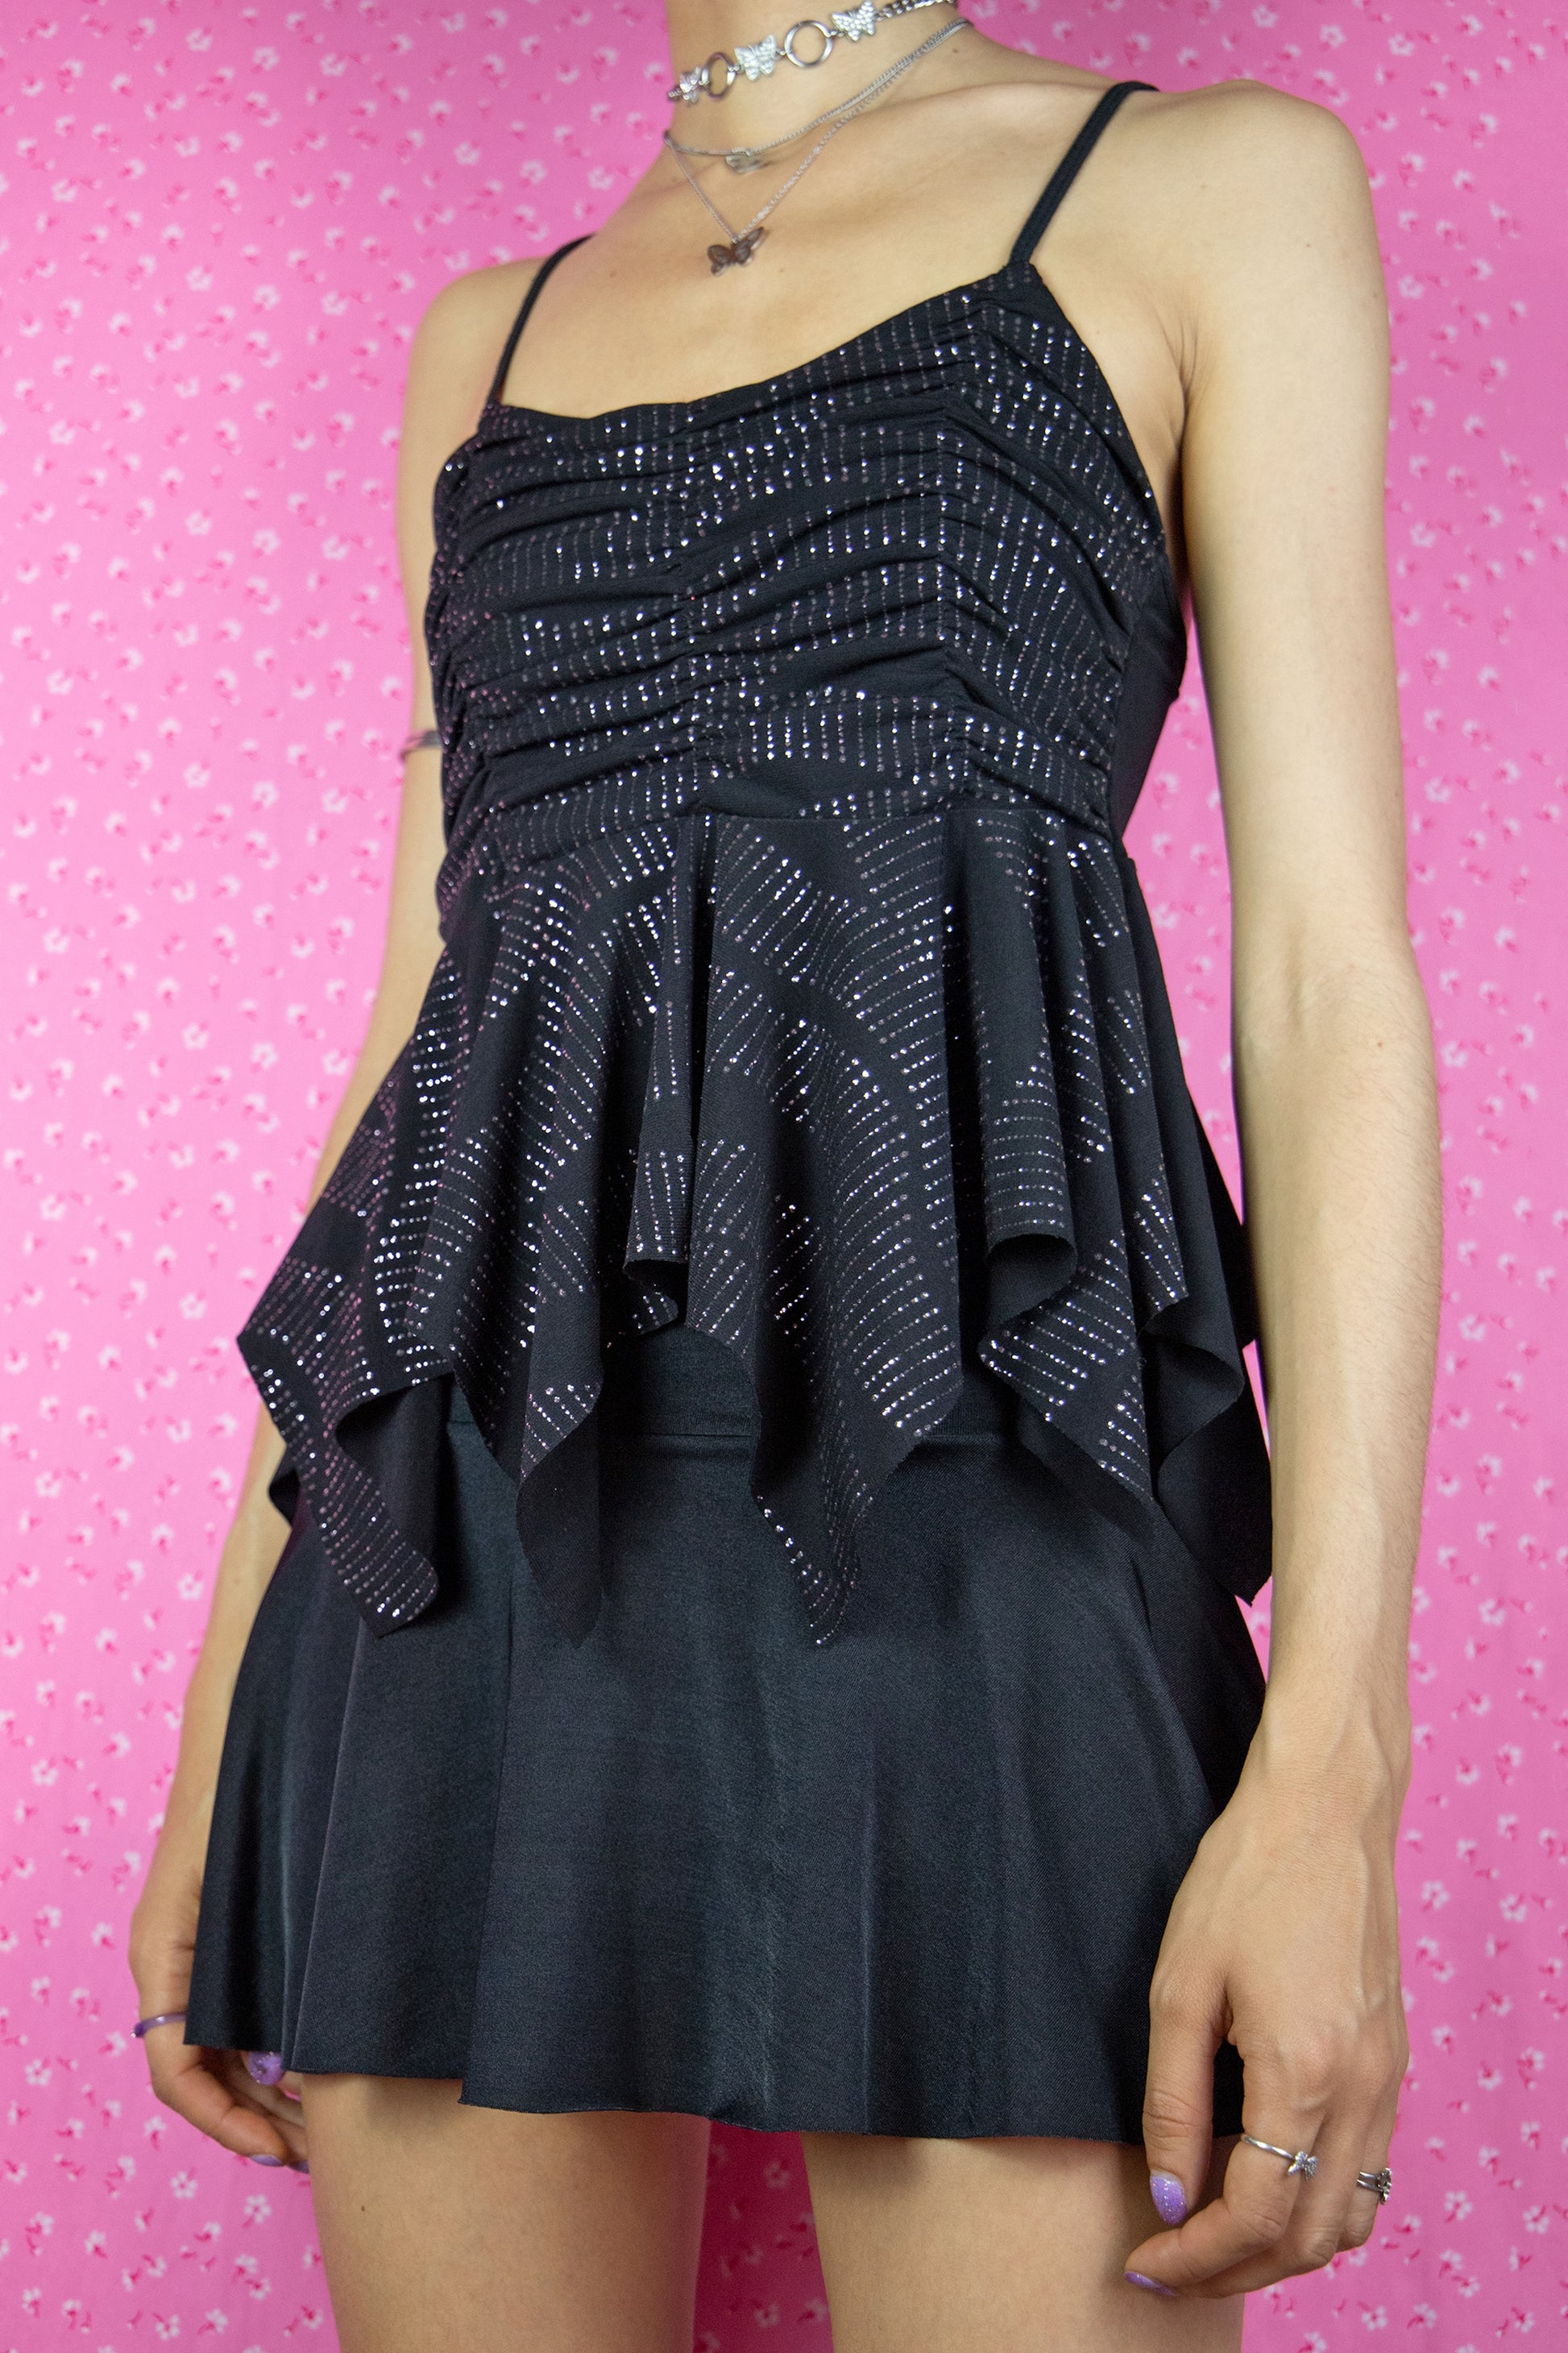 The Vintage Y2K Black Glitter Ruched Top is a sleek, pointy, stretch tank top in black with a ruched front and eye-catching sparkly glitter details. This stunning top perfectly embodies the cyber fairy goth Y2K style from the 2000s, making it a gorgeous addition to your collection.